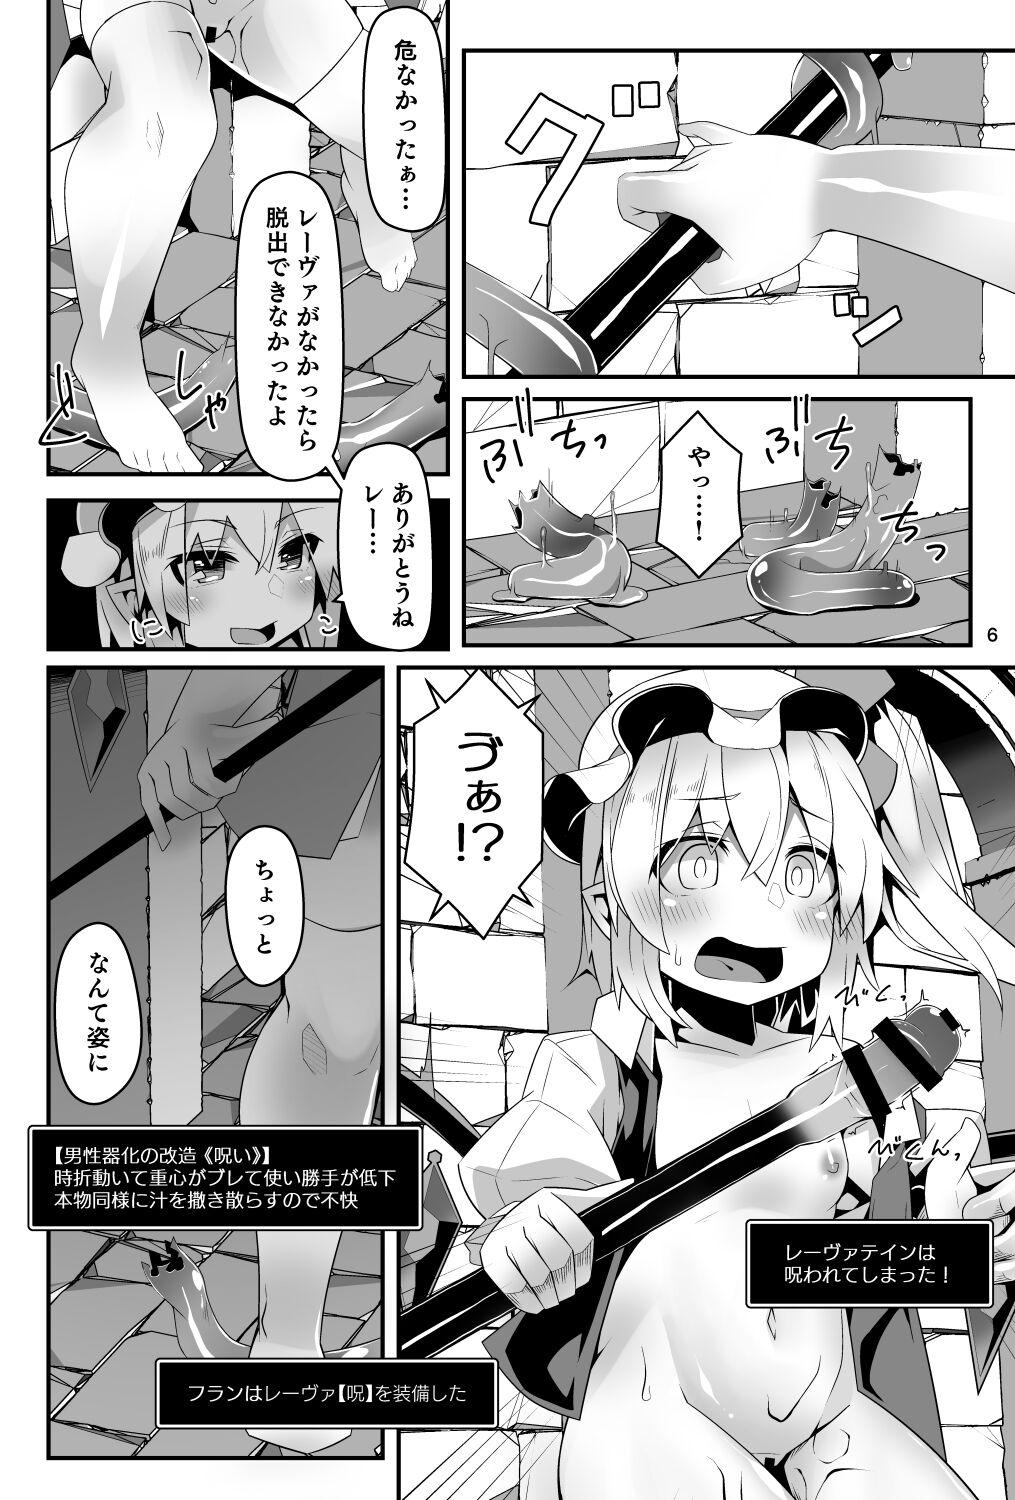 Ameteur Porn Flan-chan no Ero Trap Dungeon Accept Stigma - Touhou project Gapes Gaping Asshole - Page 6